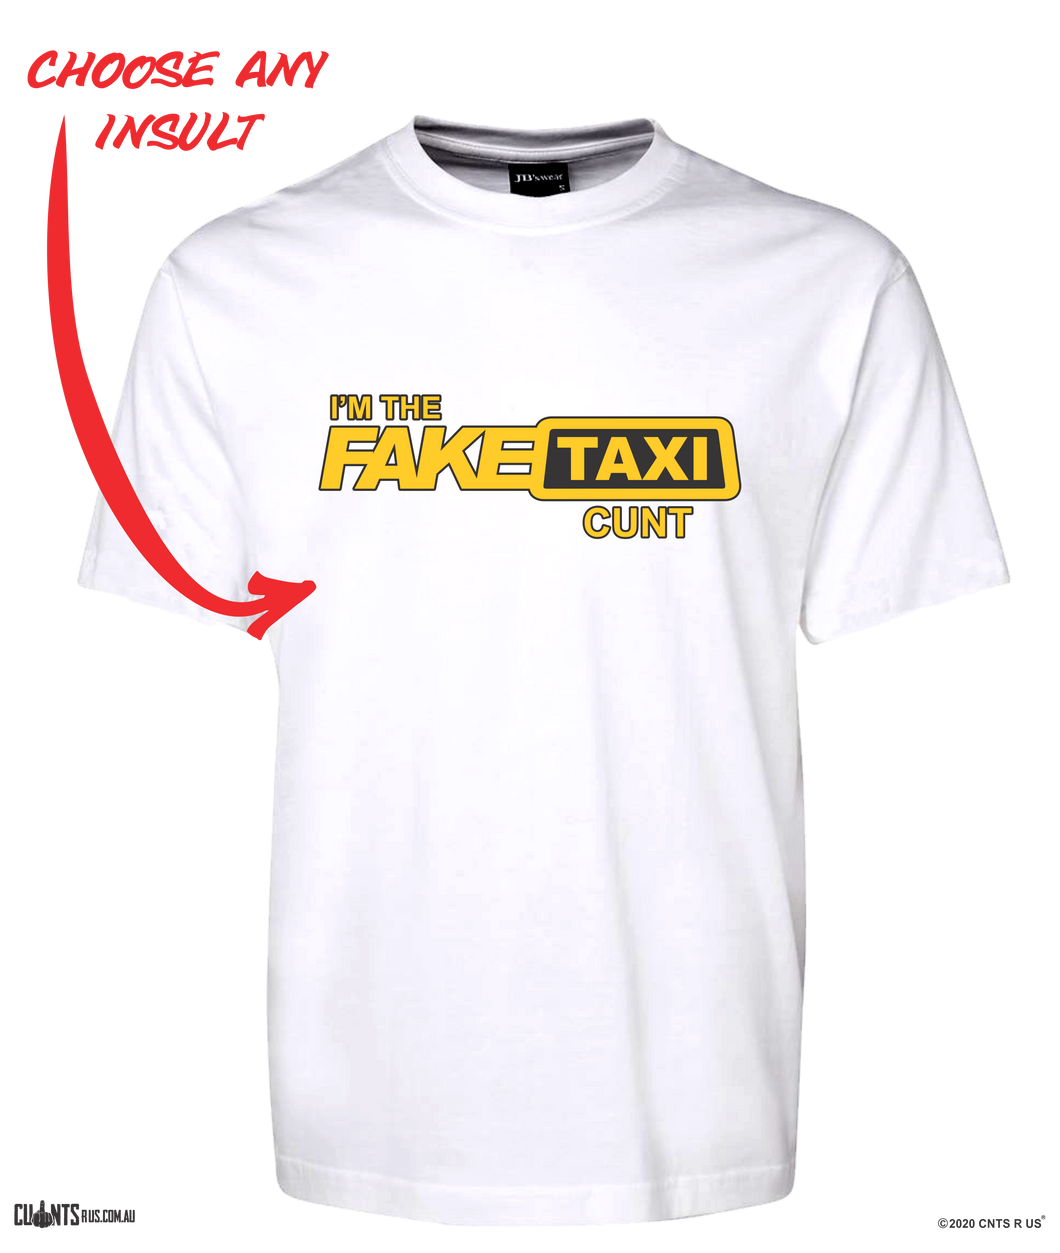 I'm The Fake Taxi Cunt T-Shirt Adult Tee CRU01-1HT-24018